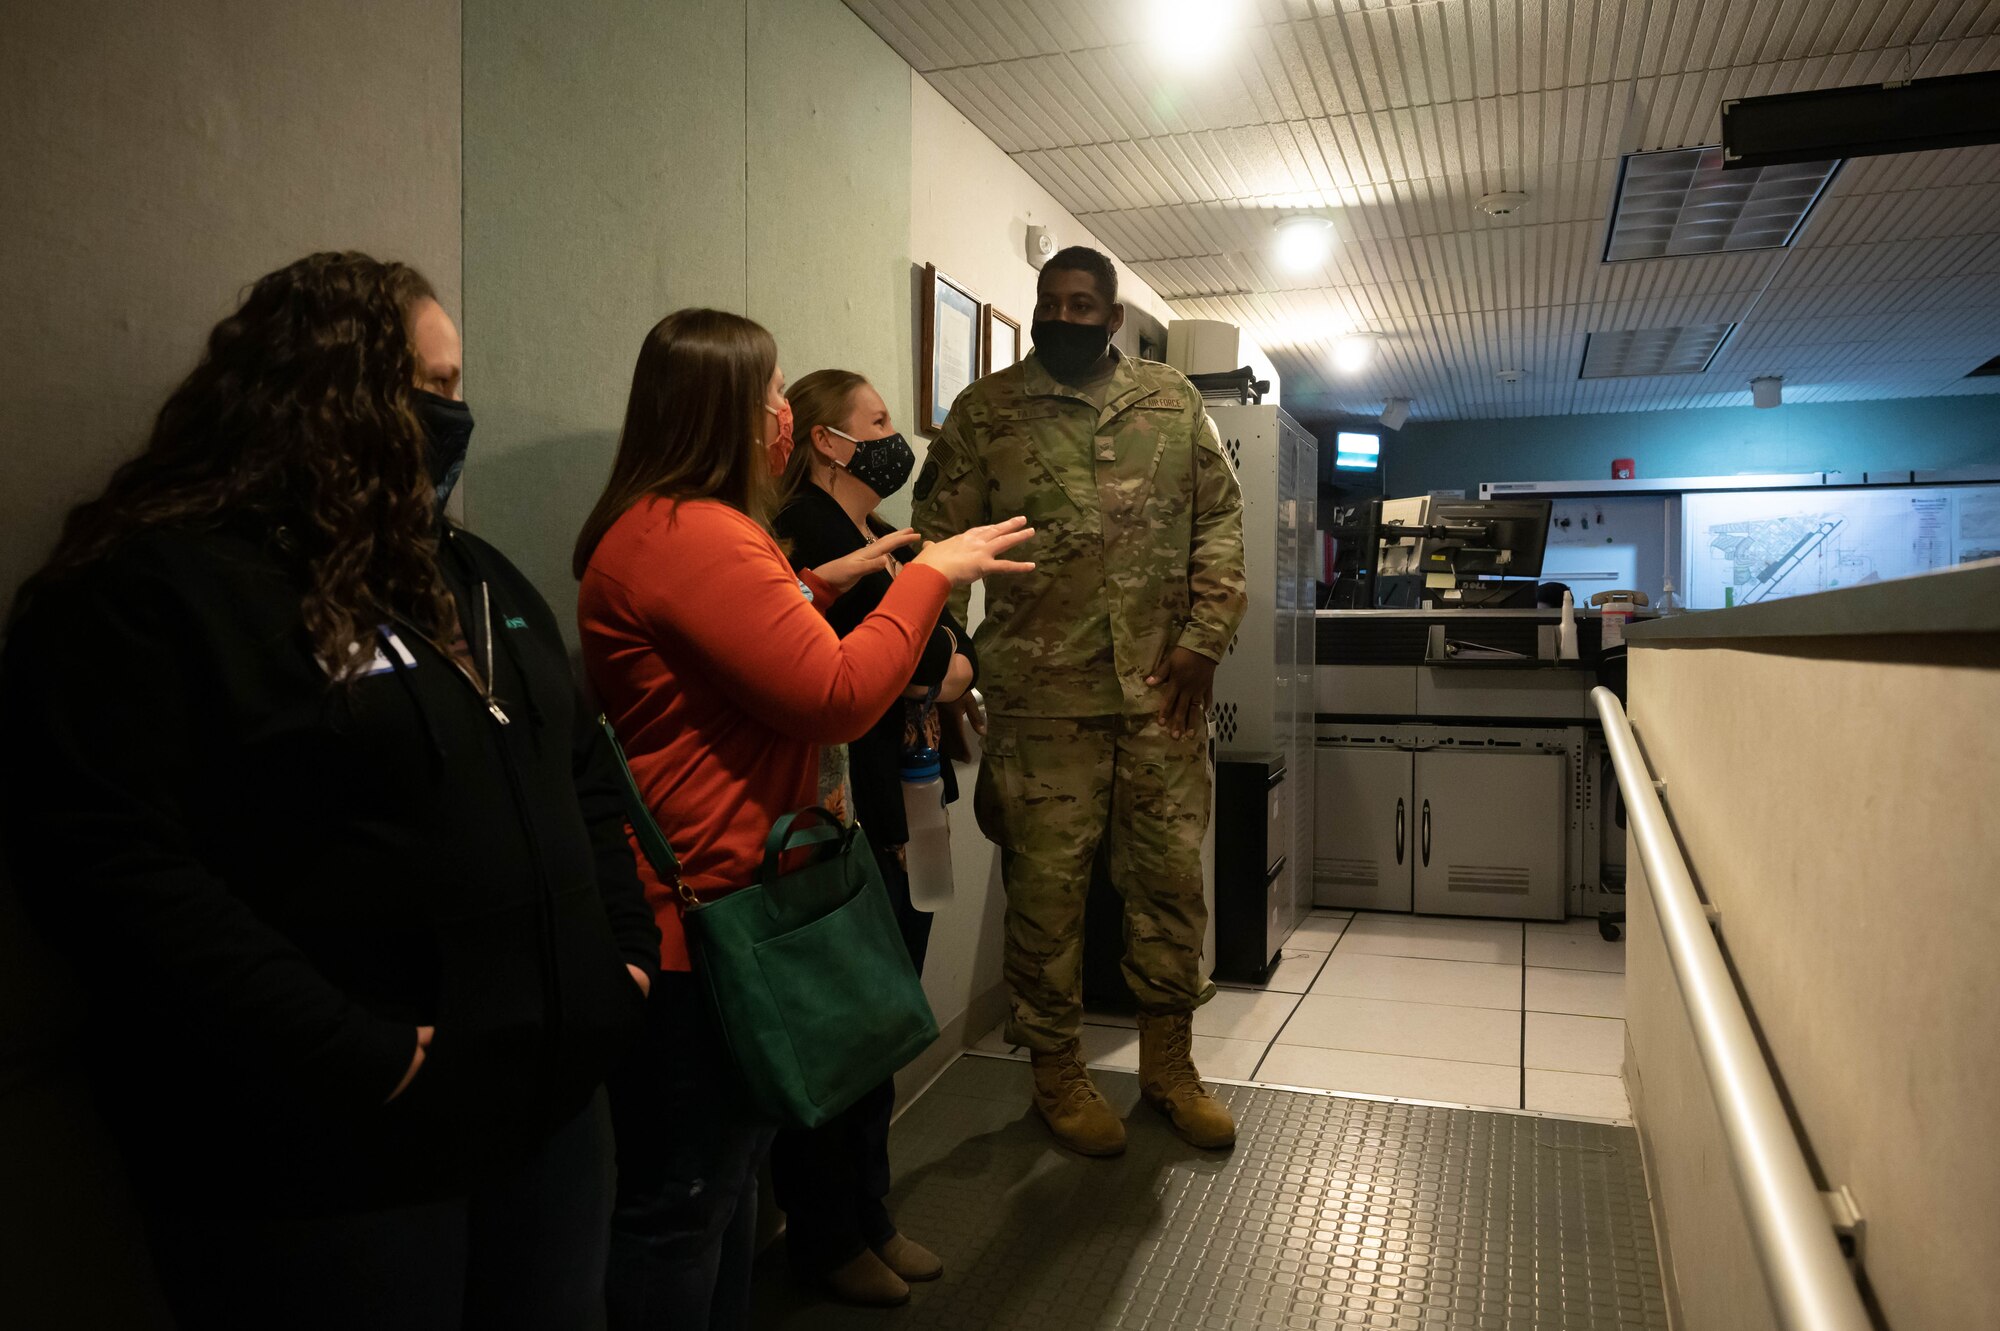 Senior Airman Sterling Tate, right, 341st Civil Engineer Squadron firefighter, escorts military spouses into the Base Defense Operations Center during a tour May 7, 2021, at Malmstrom Air Force Base, Mont.